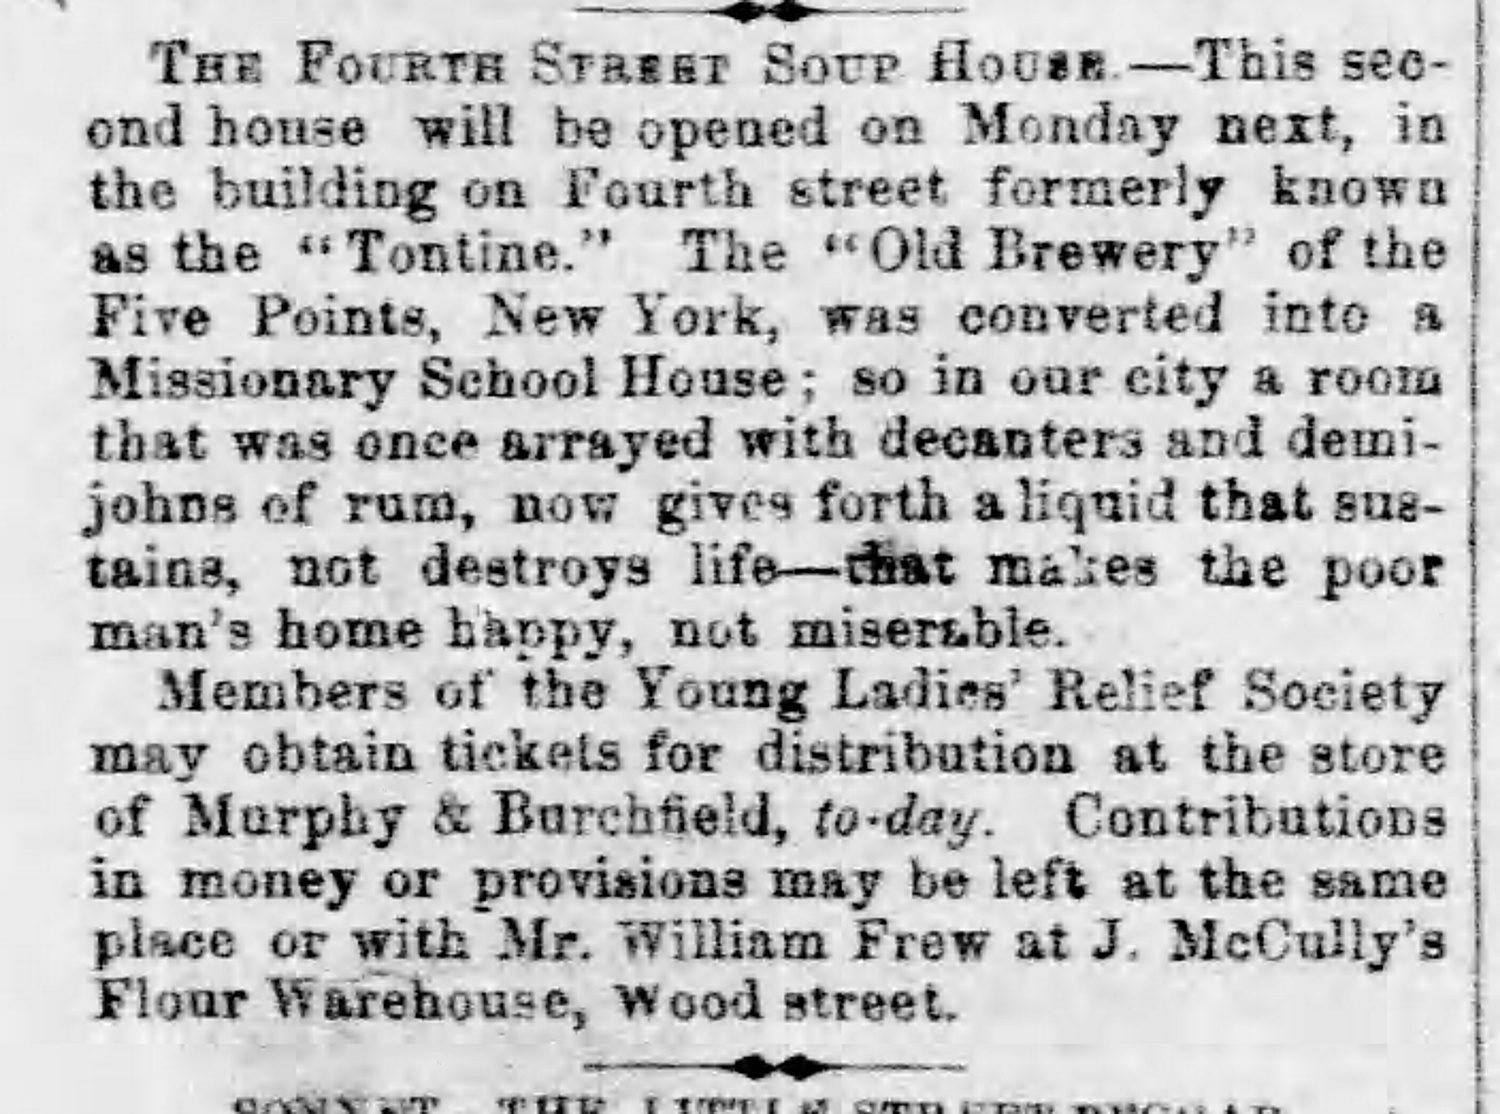 Announcement of the opening of the Fourth Street soup house. The Daily Pittsburgh Gazette, February 2, 1855.